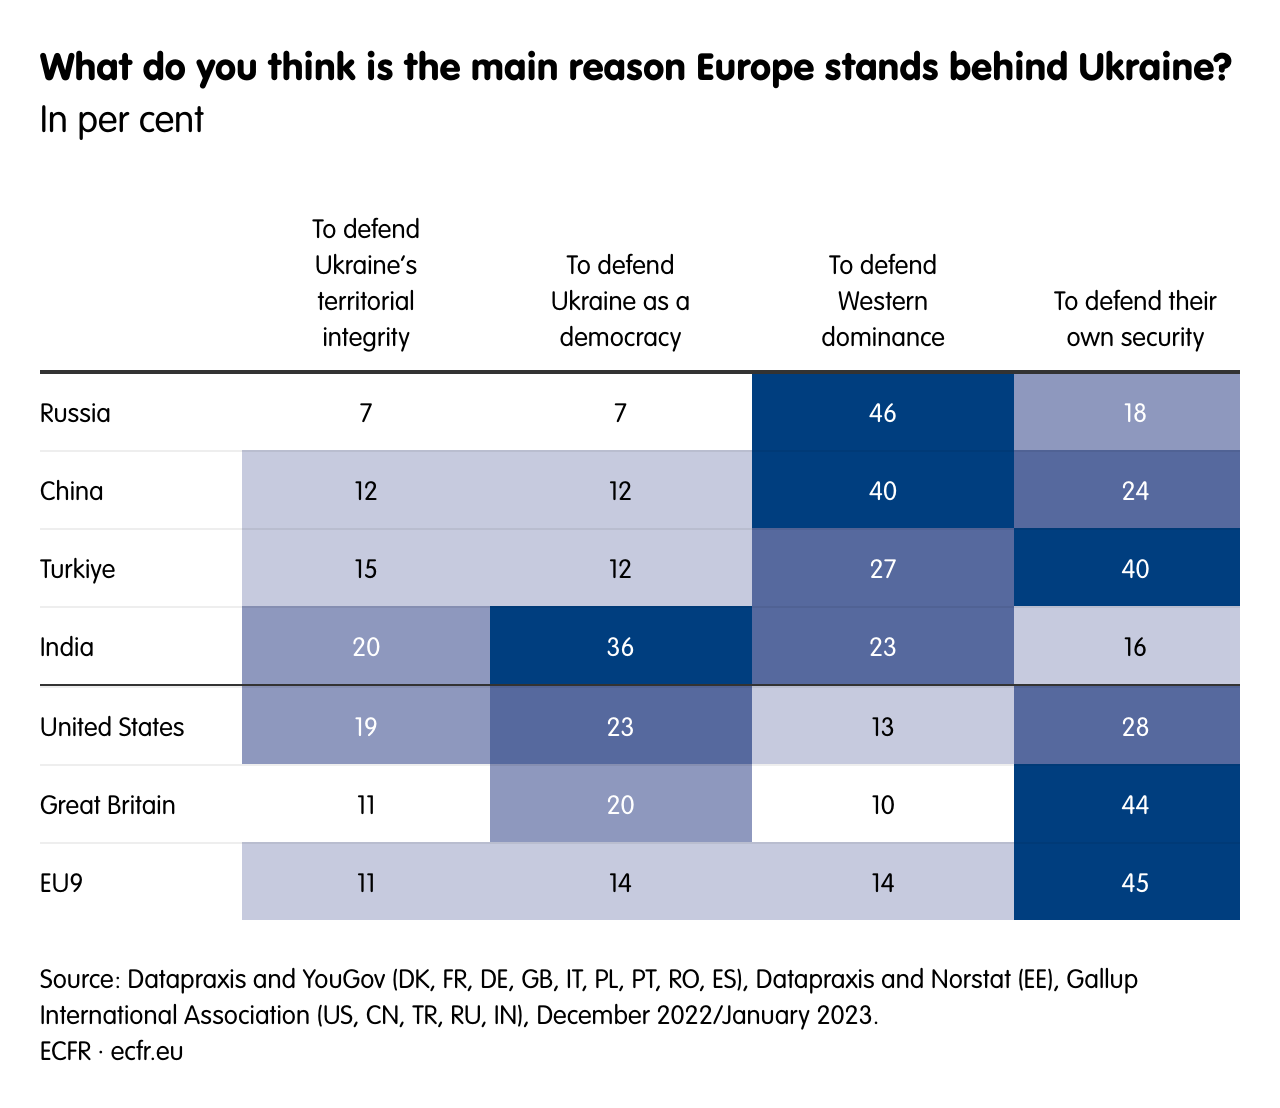 What do you think is the main reason Europe stands behind Ukraine?